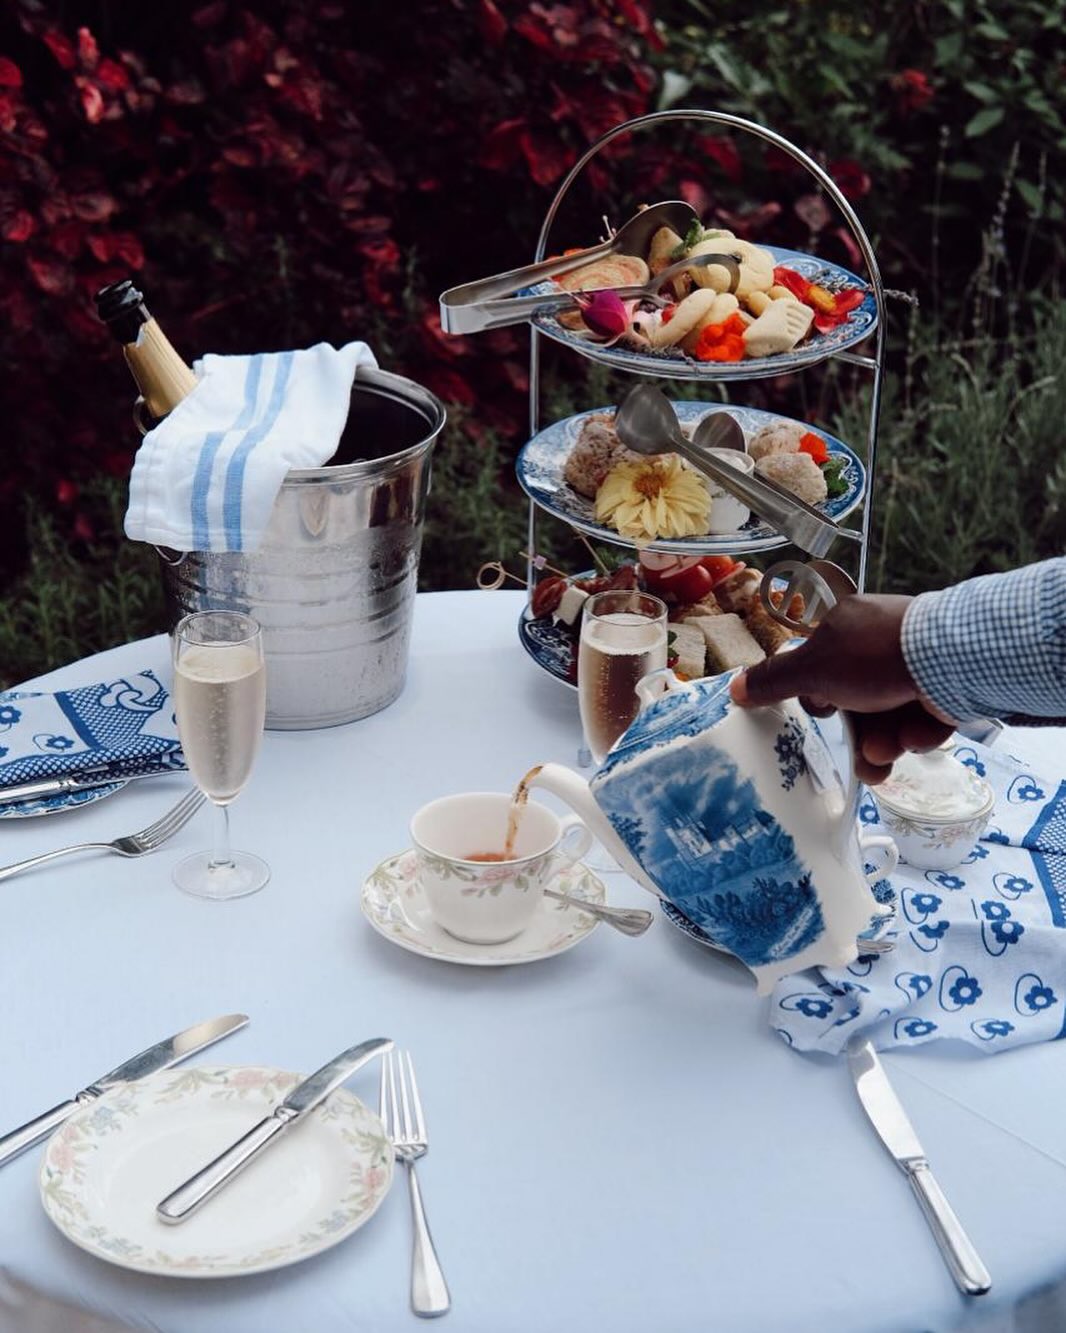 There is a certain decadence about lingering over high tea. No pressure to be anywhere or to do anything. To just take in the view and enjoy the warm of the afternoon whilst indulging a few tasty morsels. 
#afternoontea #hightea #lifeofleisure #norush #takeyourtime #relaxed